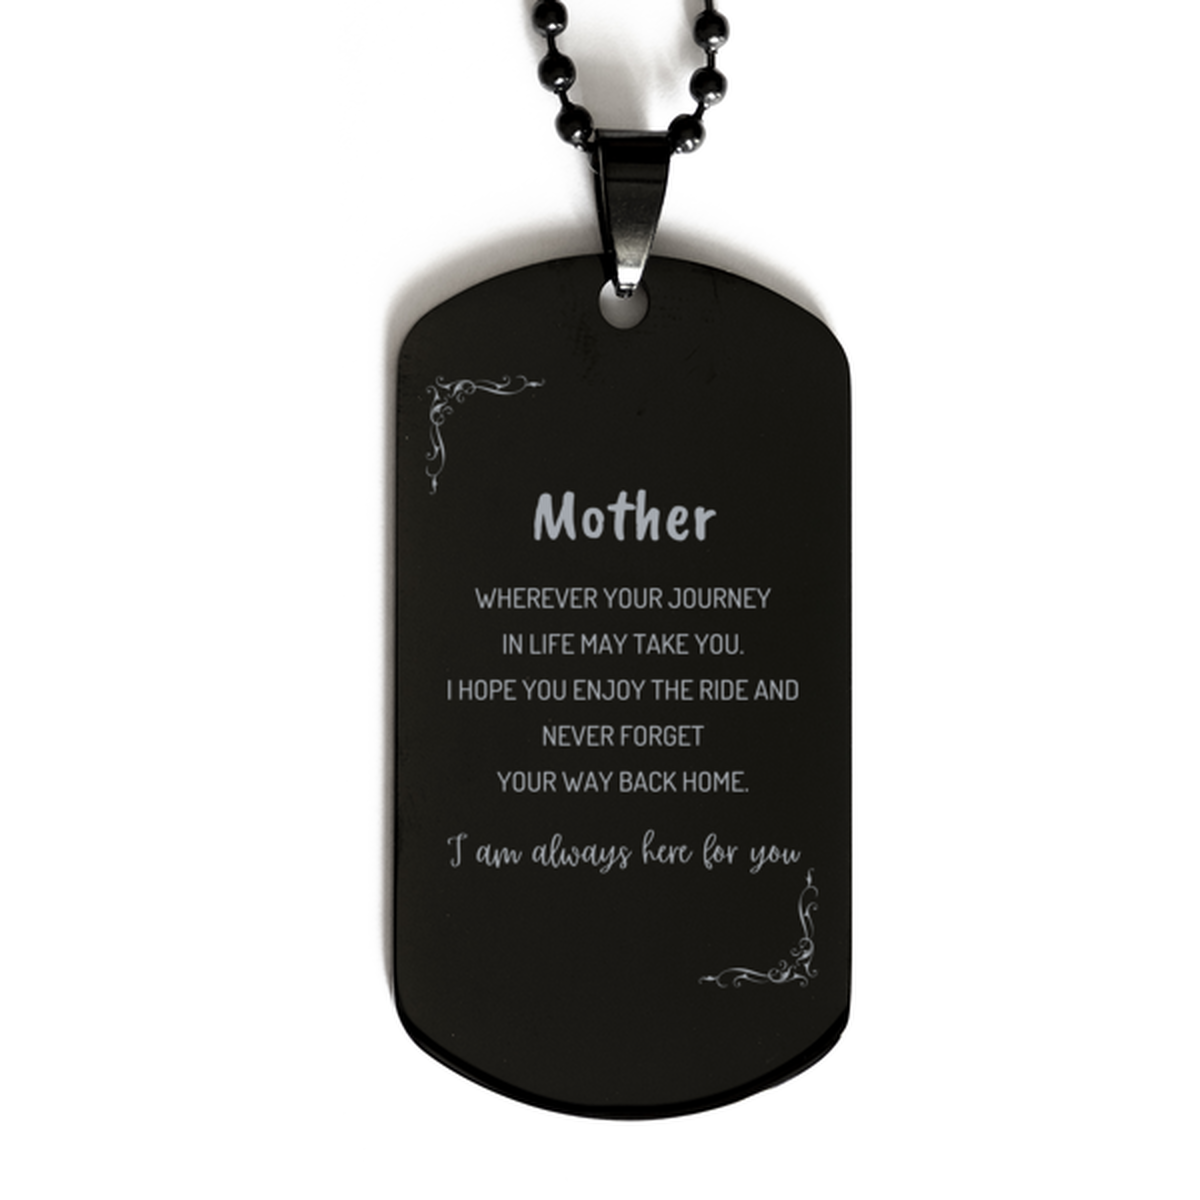 Mother wherever your journey in life may take you, I am always here for you Mother Black Dog Tag, Awesome Christmas Gifts For Mother, Mother Birthday Gifts for Men Women Family Loved One